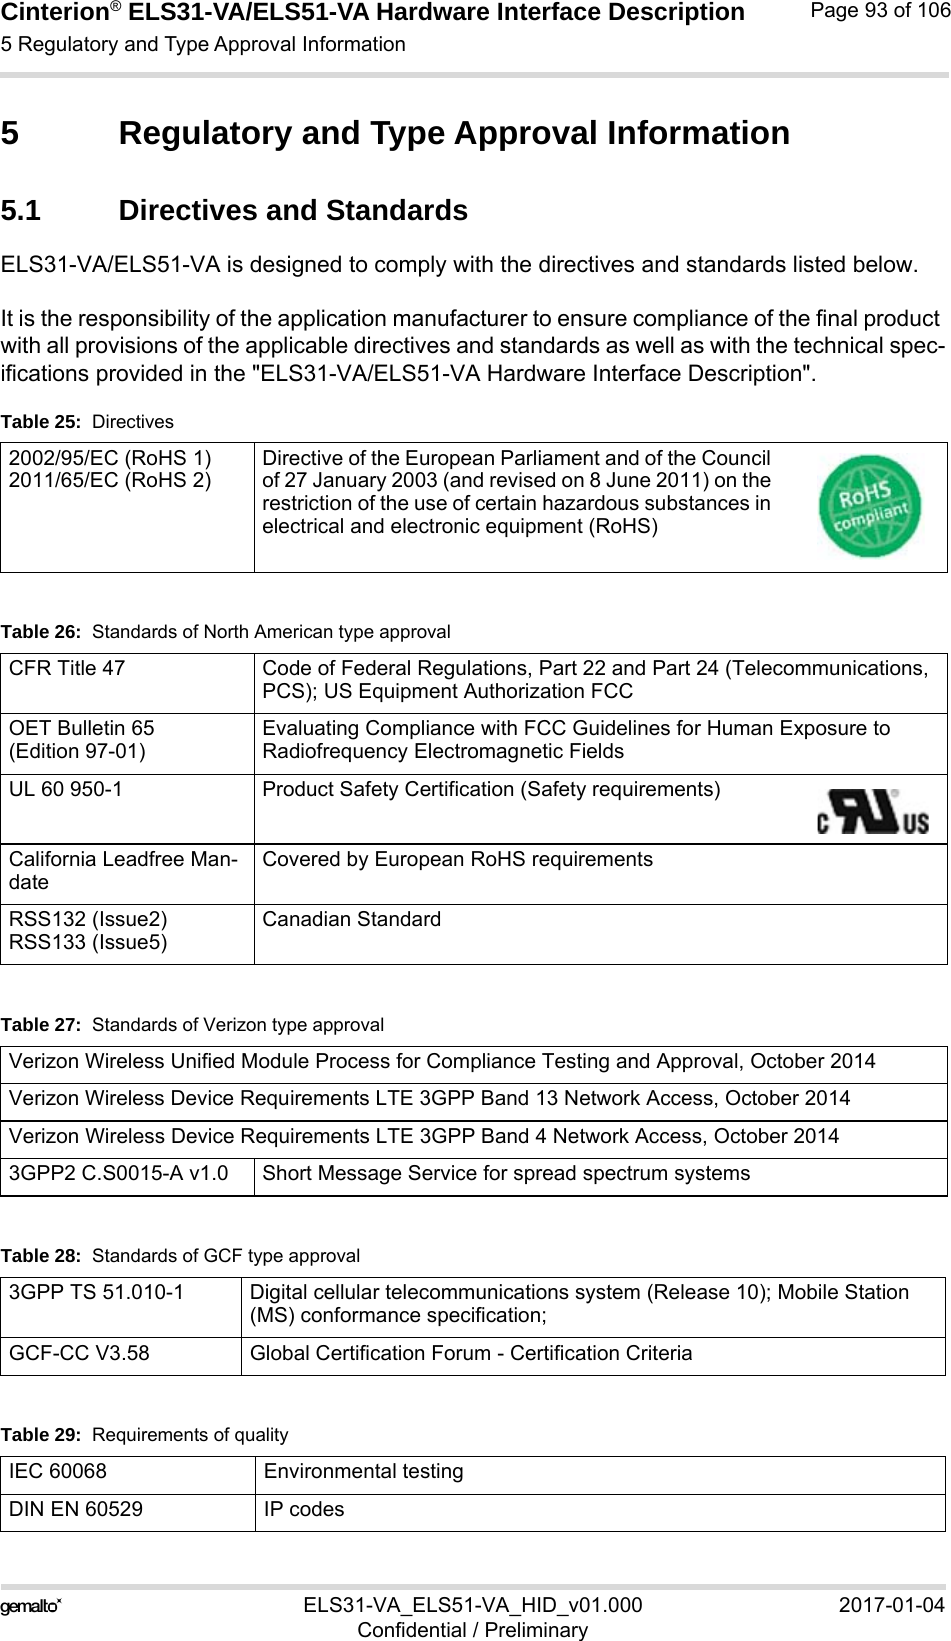 Cinterion® ELS31-VA/ELS51-VA Hardware Interface Description5 Regulatory and Type Approval Information98ELS31-VA_ELS51-VA_HID_v01.000 2017-01-04Confidential / PreliminaryPage 93 of 1065 Regulatory and Type Approval Information5.1 Directives and StandardsELS31-VA/ELS51-VA is designed to comply with the directives and standards listed below.It is the responsibility of the application manufacturer to ensure compliance of the final product with all provisions of the applicable directives and standards as well as with the technical spec-ifications provided in the &quot;ELS31-VA/ELS51-VA Hardware Interface Description&quot;.Table 25:  Directives2002/95/EC (RoHS 1)2011/65/EC (RoHS 2)Directive of the European Parliament and of the Council of 27 January 2003 (and revised on 8 June 2011) on the restriction of the use of certain hazardous substances in electrical and electronic equipment (RoHS)Table 26:  Standards of North American type approvalCFR Title 47 Code of Federal Regulations, Part 22 and Part 24 (Telecommunications, PCS); US Equipment Authorization FCCOET Bulletin 65 (Edition 97-01) Evaluating Compliance with FCC Guidelines for Human Exposure to Radiofrequency Electromagnetic FieldsUL 60 950-1 Product Safety Certification (Safety requirements)California Leadfree Man-dateCovered by European RoHS requirementsRSS132 (Issue2)RSS133 (Issue5)Canadian StandardTable 27:  Standards of Verizon type approvalVerizon Wireless Unified Module Process for Compliance Testing and Approval, October 2014Verizon Wireless Device Requirements LTE 3GPP Band 13 Network Access, October 2014Verizon Wireless Device Requirements LTE 3GPP Band 4 Network Access, October 20143GPP2 C.S0015-A v1.0  Short Message Service for spread spectrum systemsTable 28:  Standards of GCF type approval3GPP TS 51.010-1 Digital cellular telecommunications system (Release 10); Mobile Station (MS) conformance specification;GCF-CC V3.58  Global Certification Forum - Certification CriteriaTable 29:  Requirements of qualityIEC 60068 Environmental testingDIN EN 60529 IP codes